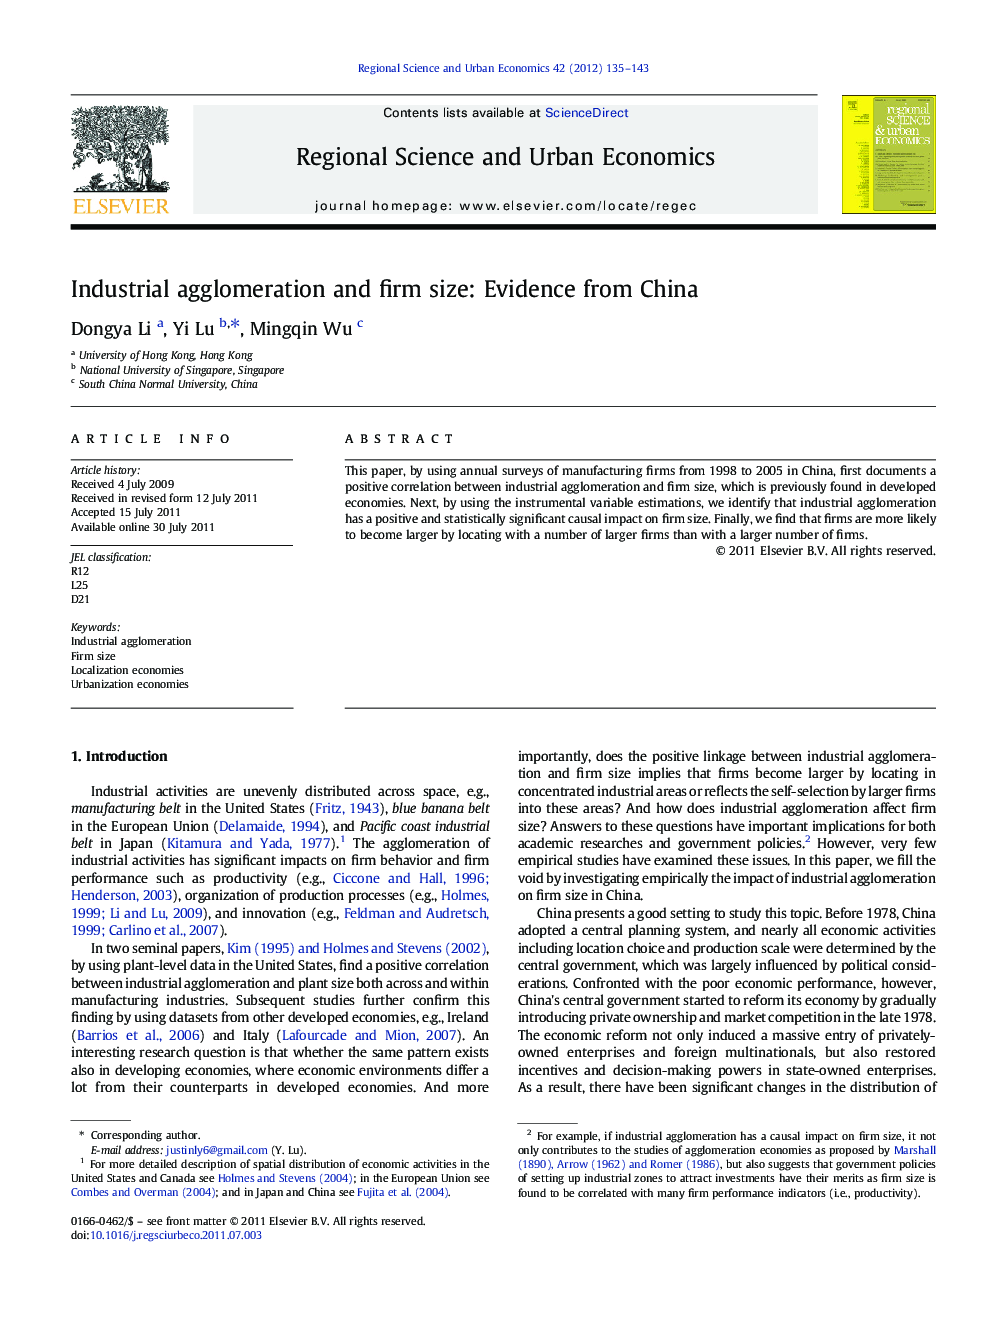 Industrial agglomeration and firm size: Evidence from China